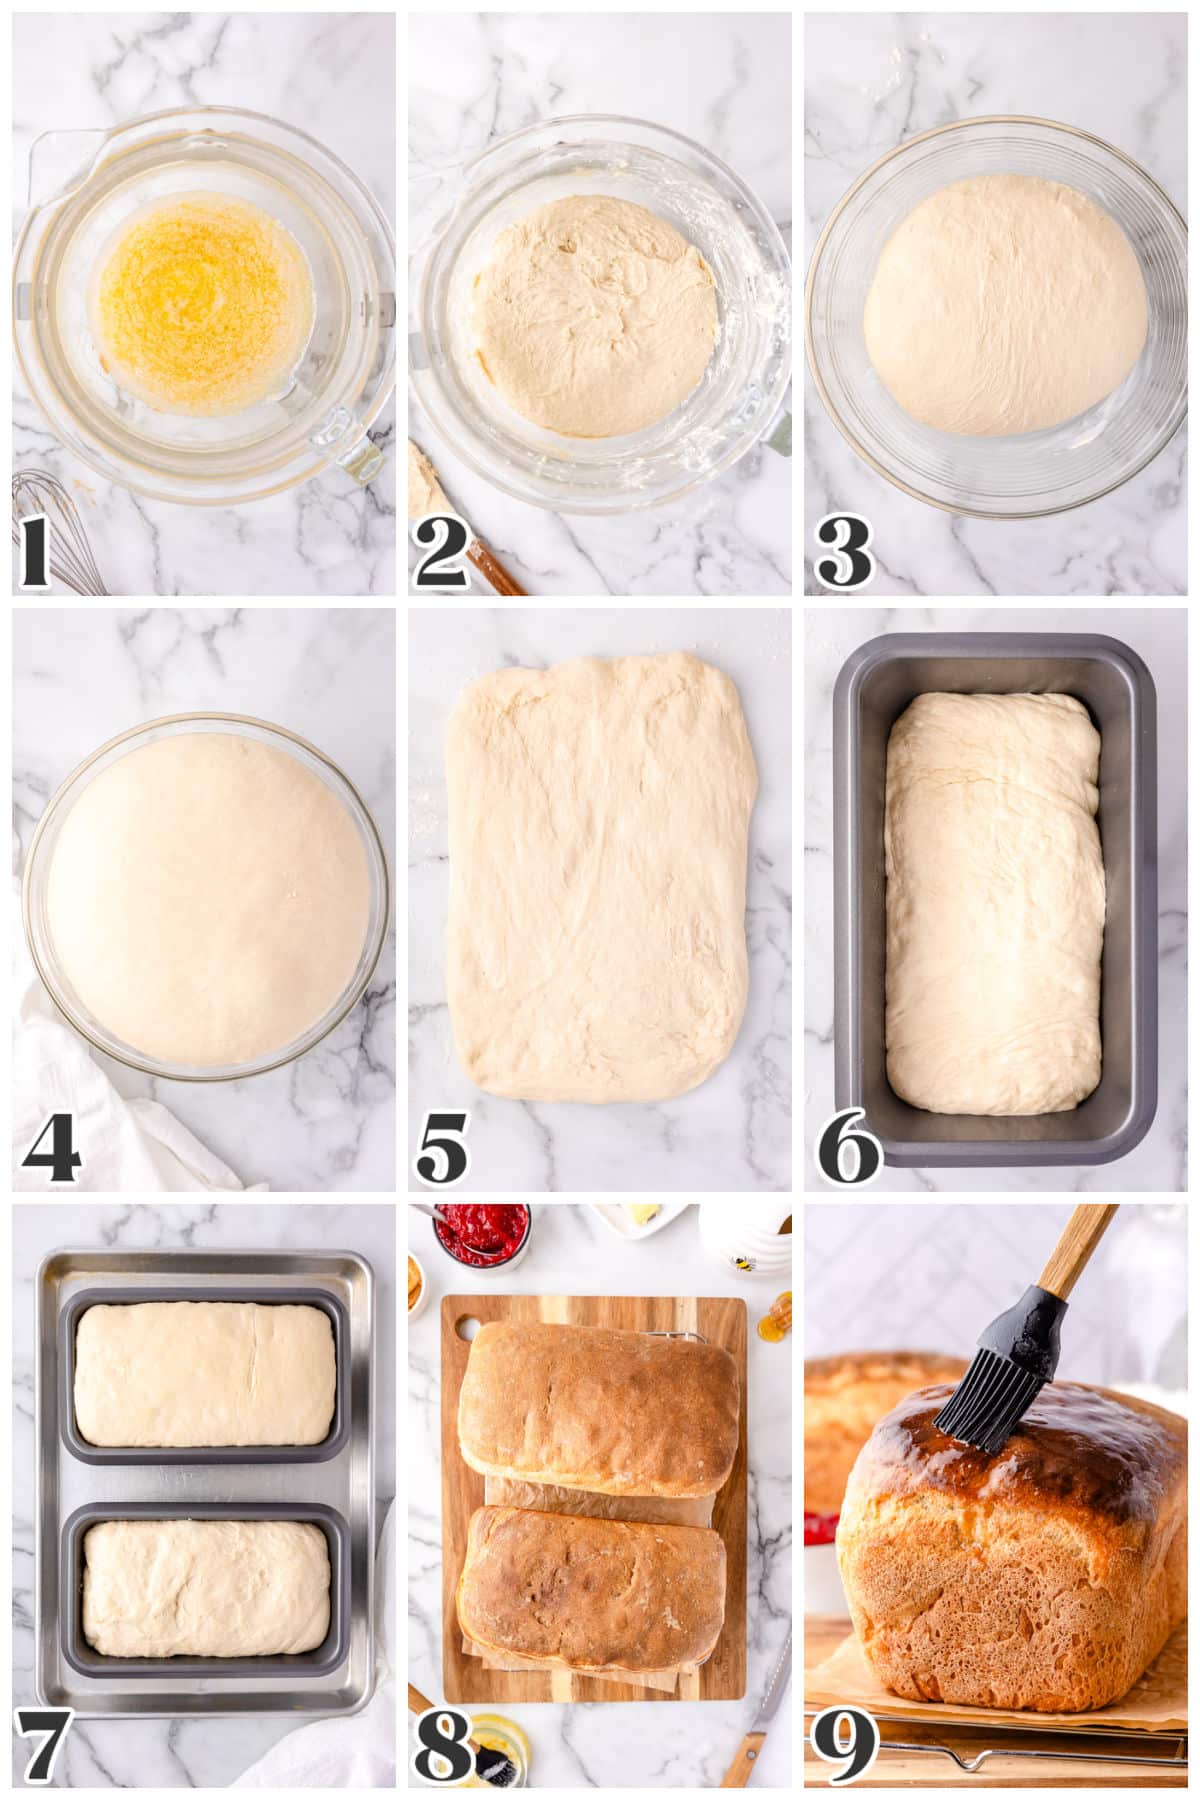 A picture collage showing how to make this recipe from making the dough to baking and cutting it.